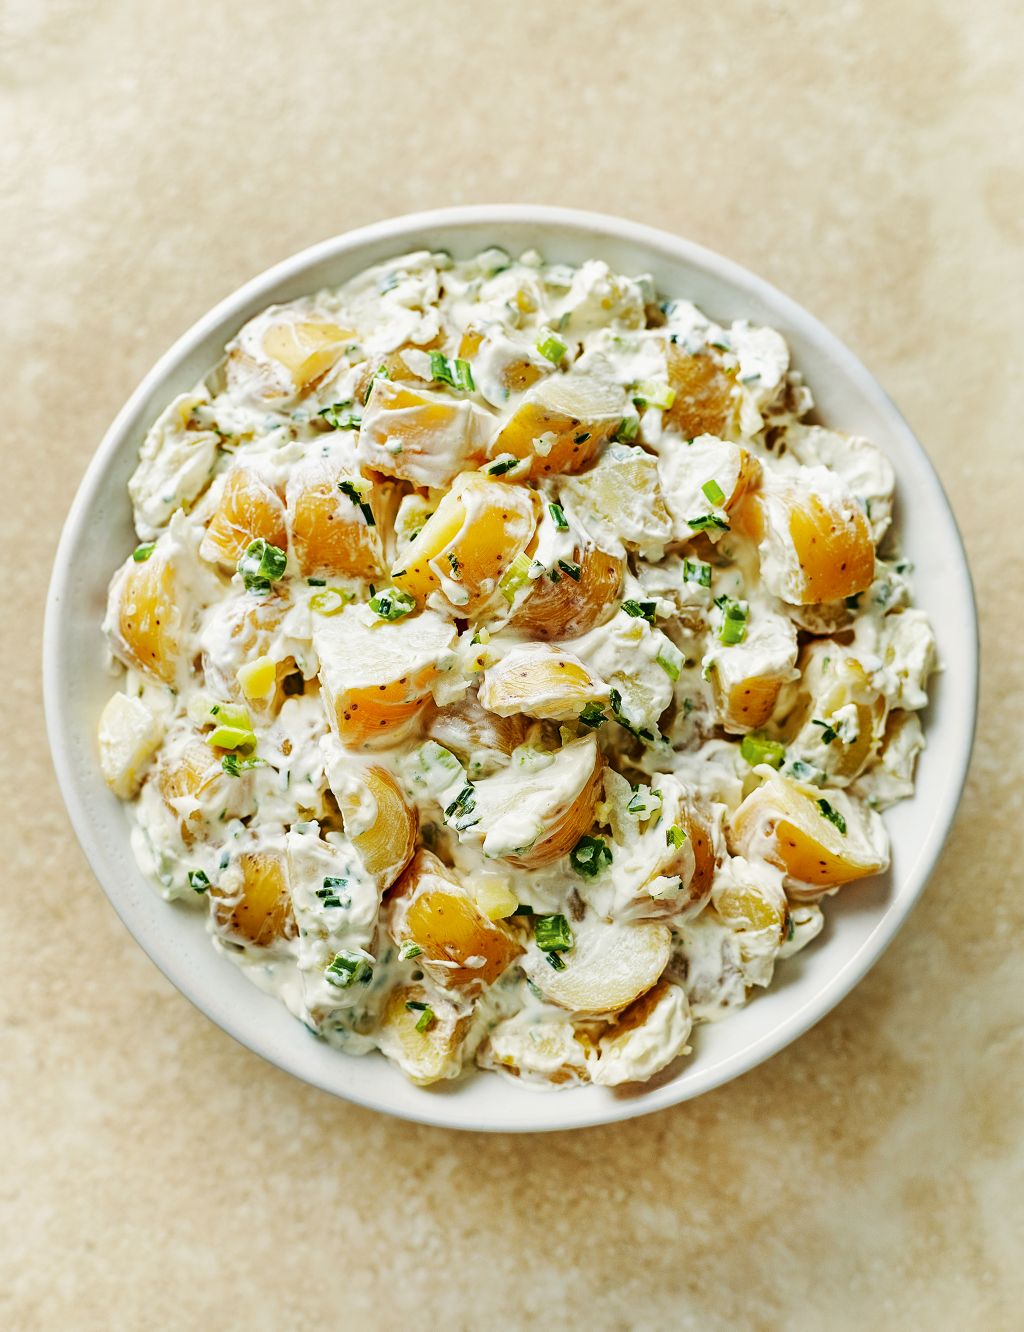 Baby Charlotte Potato Salad (Serves 6-8) - (Last Collection Date 30th September 2020) 3 of 3